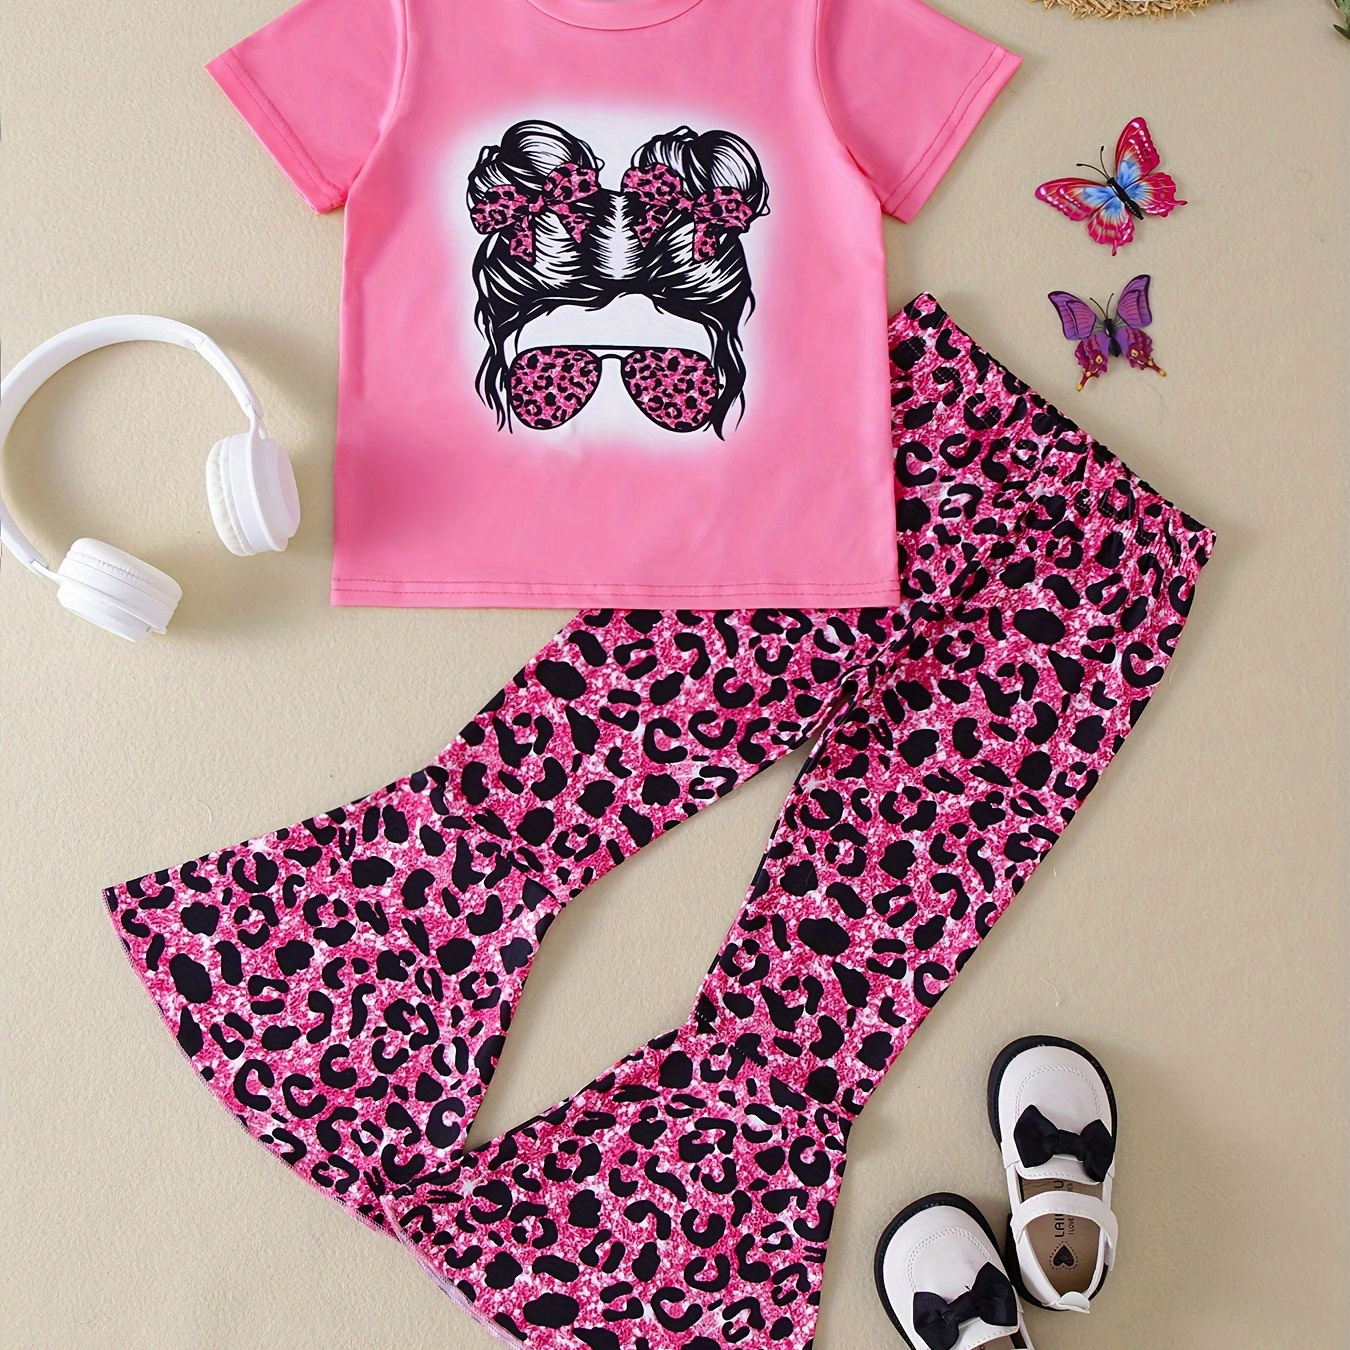 

2pcs Cartoon Girl & Leopard Print Graphic Outfits Girls Comfy Short Sleeve T-shirt + Pants Set For Outdoor